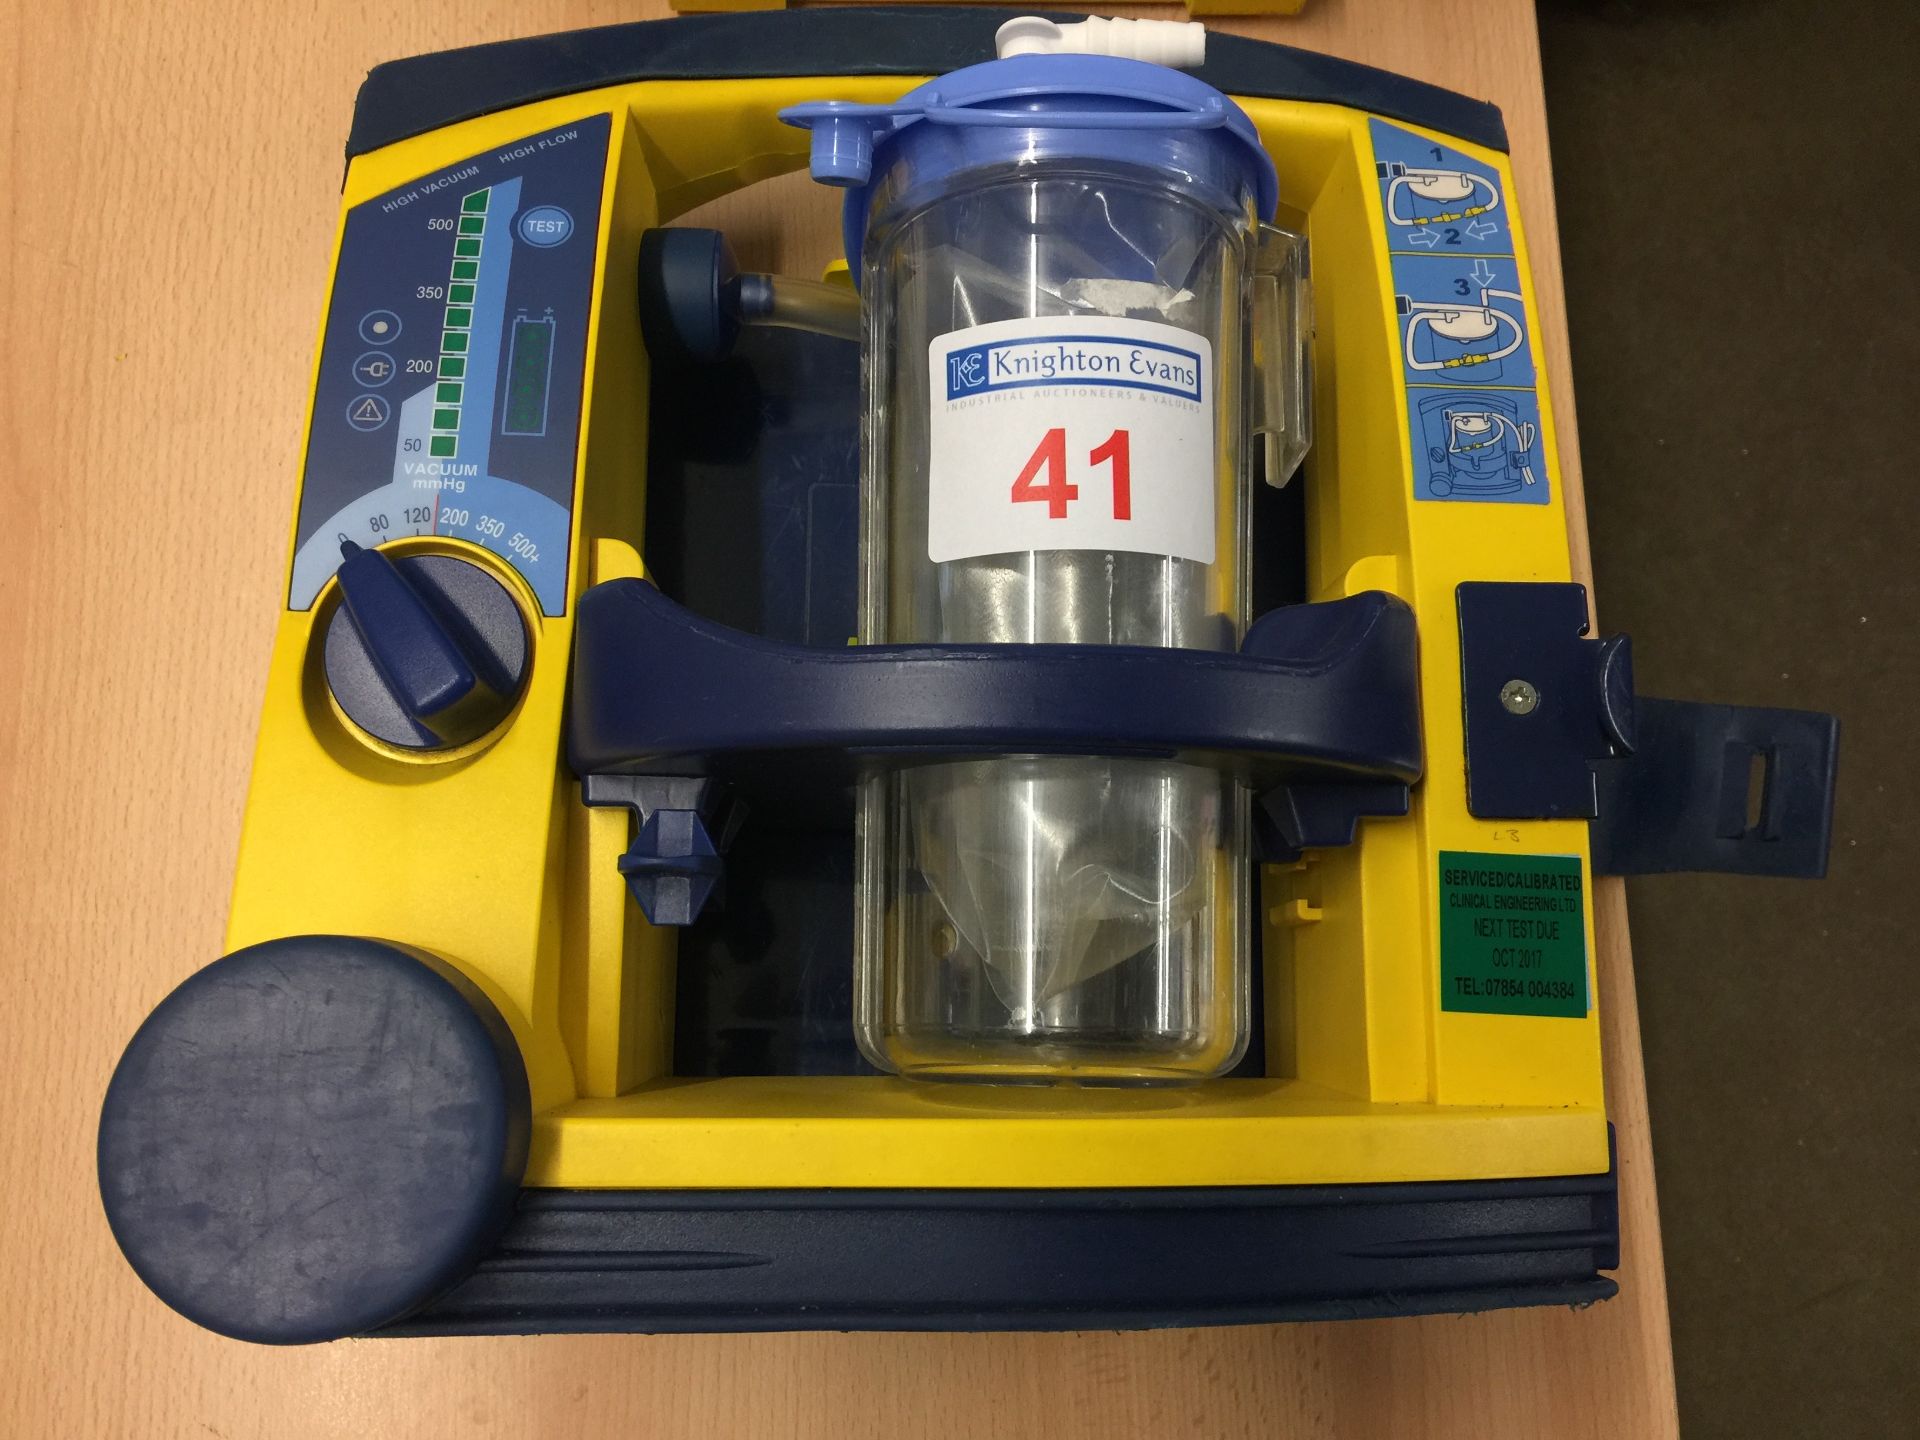 Laerdal LSU portable suction unit with mounting plate, test due October 2017 (no 12v charger)